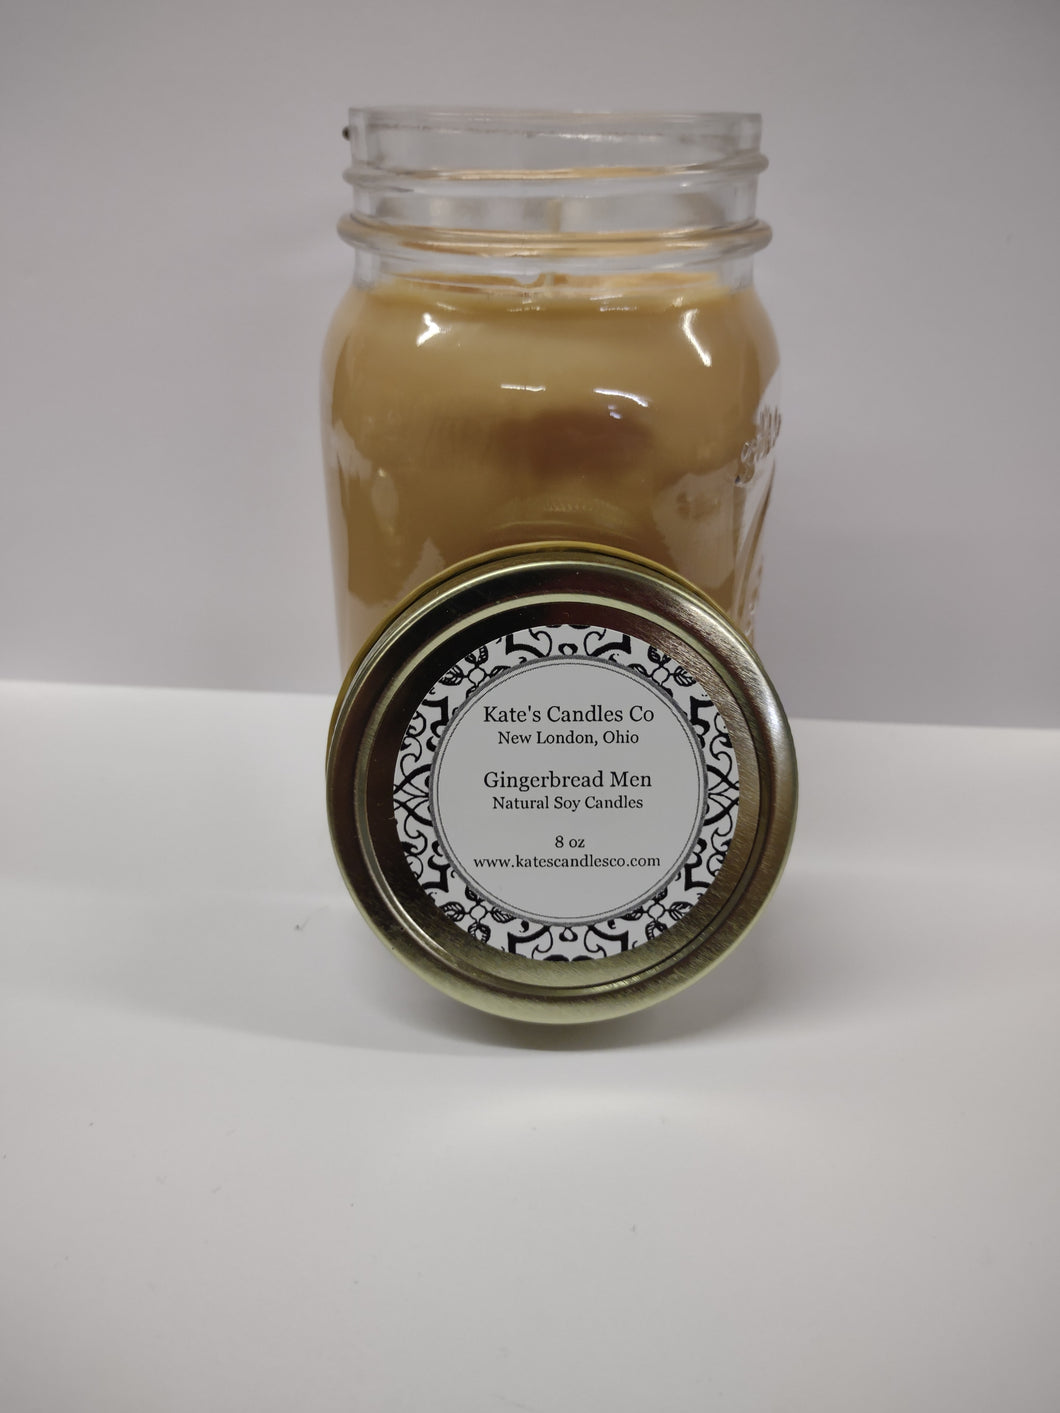 Gingerbread Men Soy Candles - Kate's Candles Co.